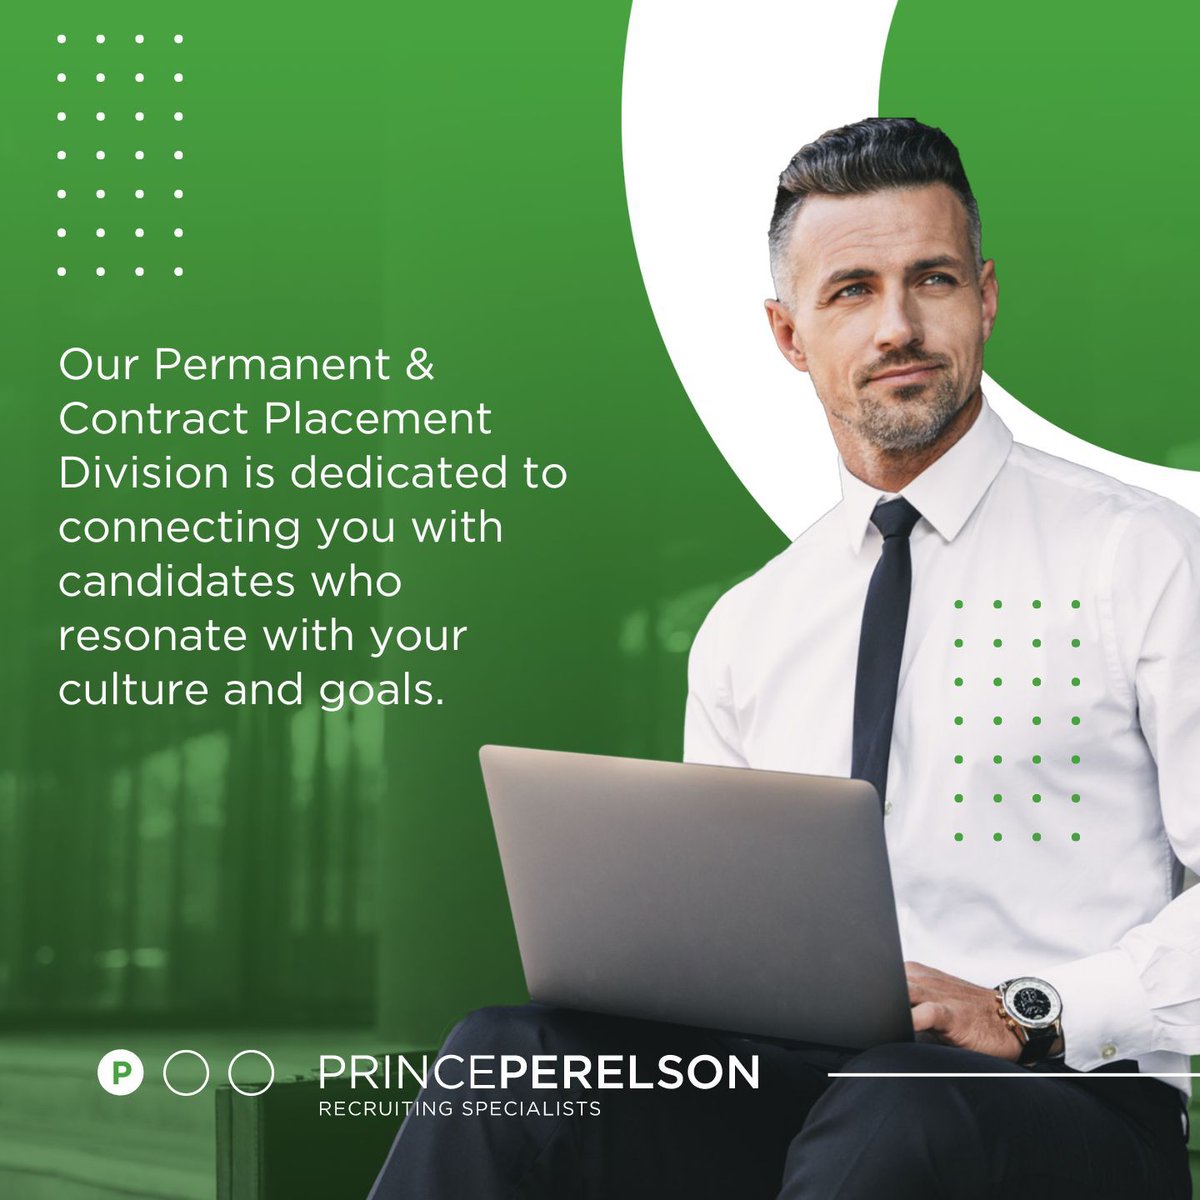 With tenured subject matter and market insights experts, our professionals are dedicated to creating tailored hiring solutions for your organization. Let's bring the right talent on board to create a brighter future together. 🤝 

#ContractPlacement #TalentMatch #hiringexperts